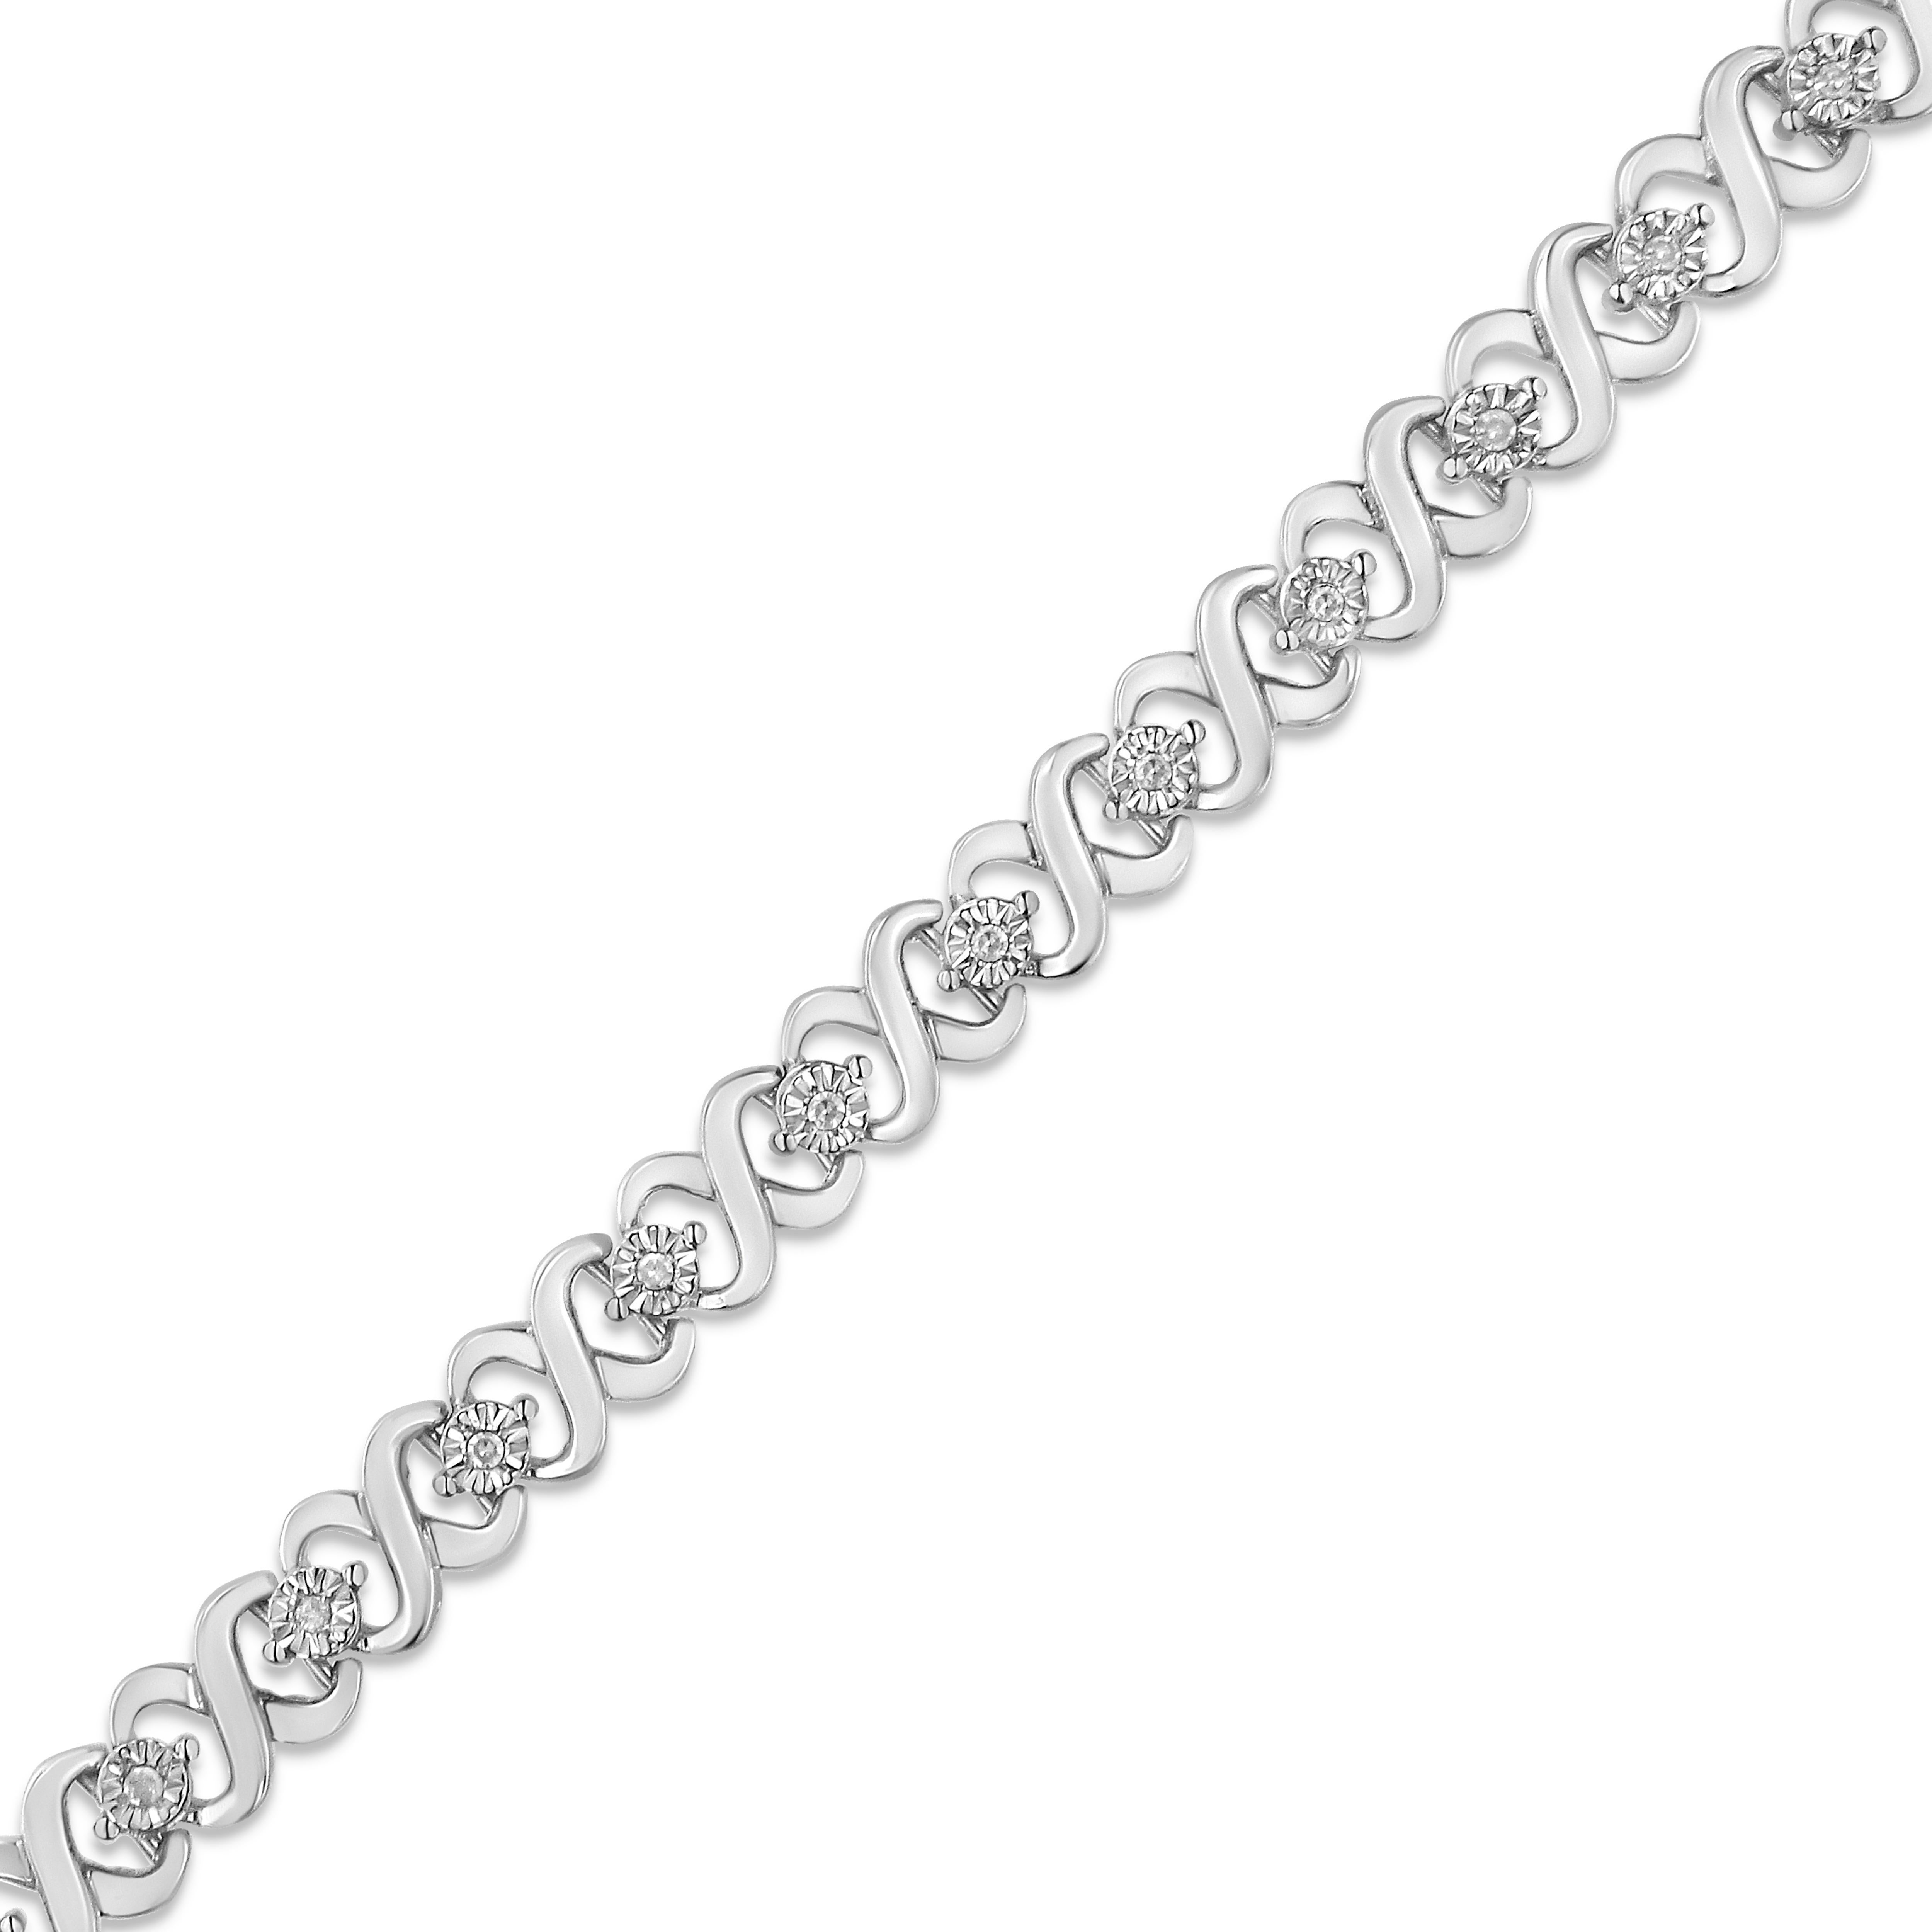 You will love this elegant and timeless classic tennis bracelet with a unique alternating pattern of silver x-links and miracle set diamonds. This authentic design is crafted of real 92.5% sterling silver that has been electro-coated with genuine